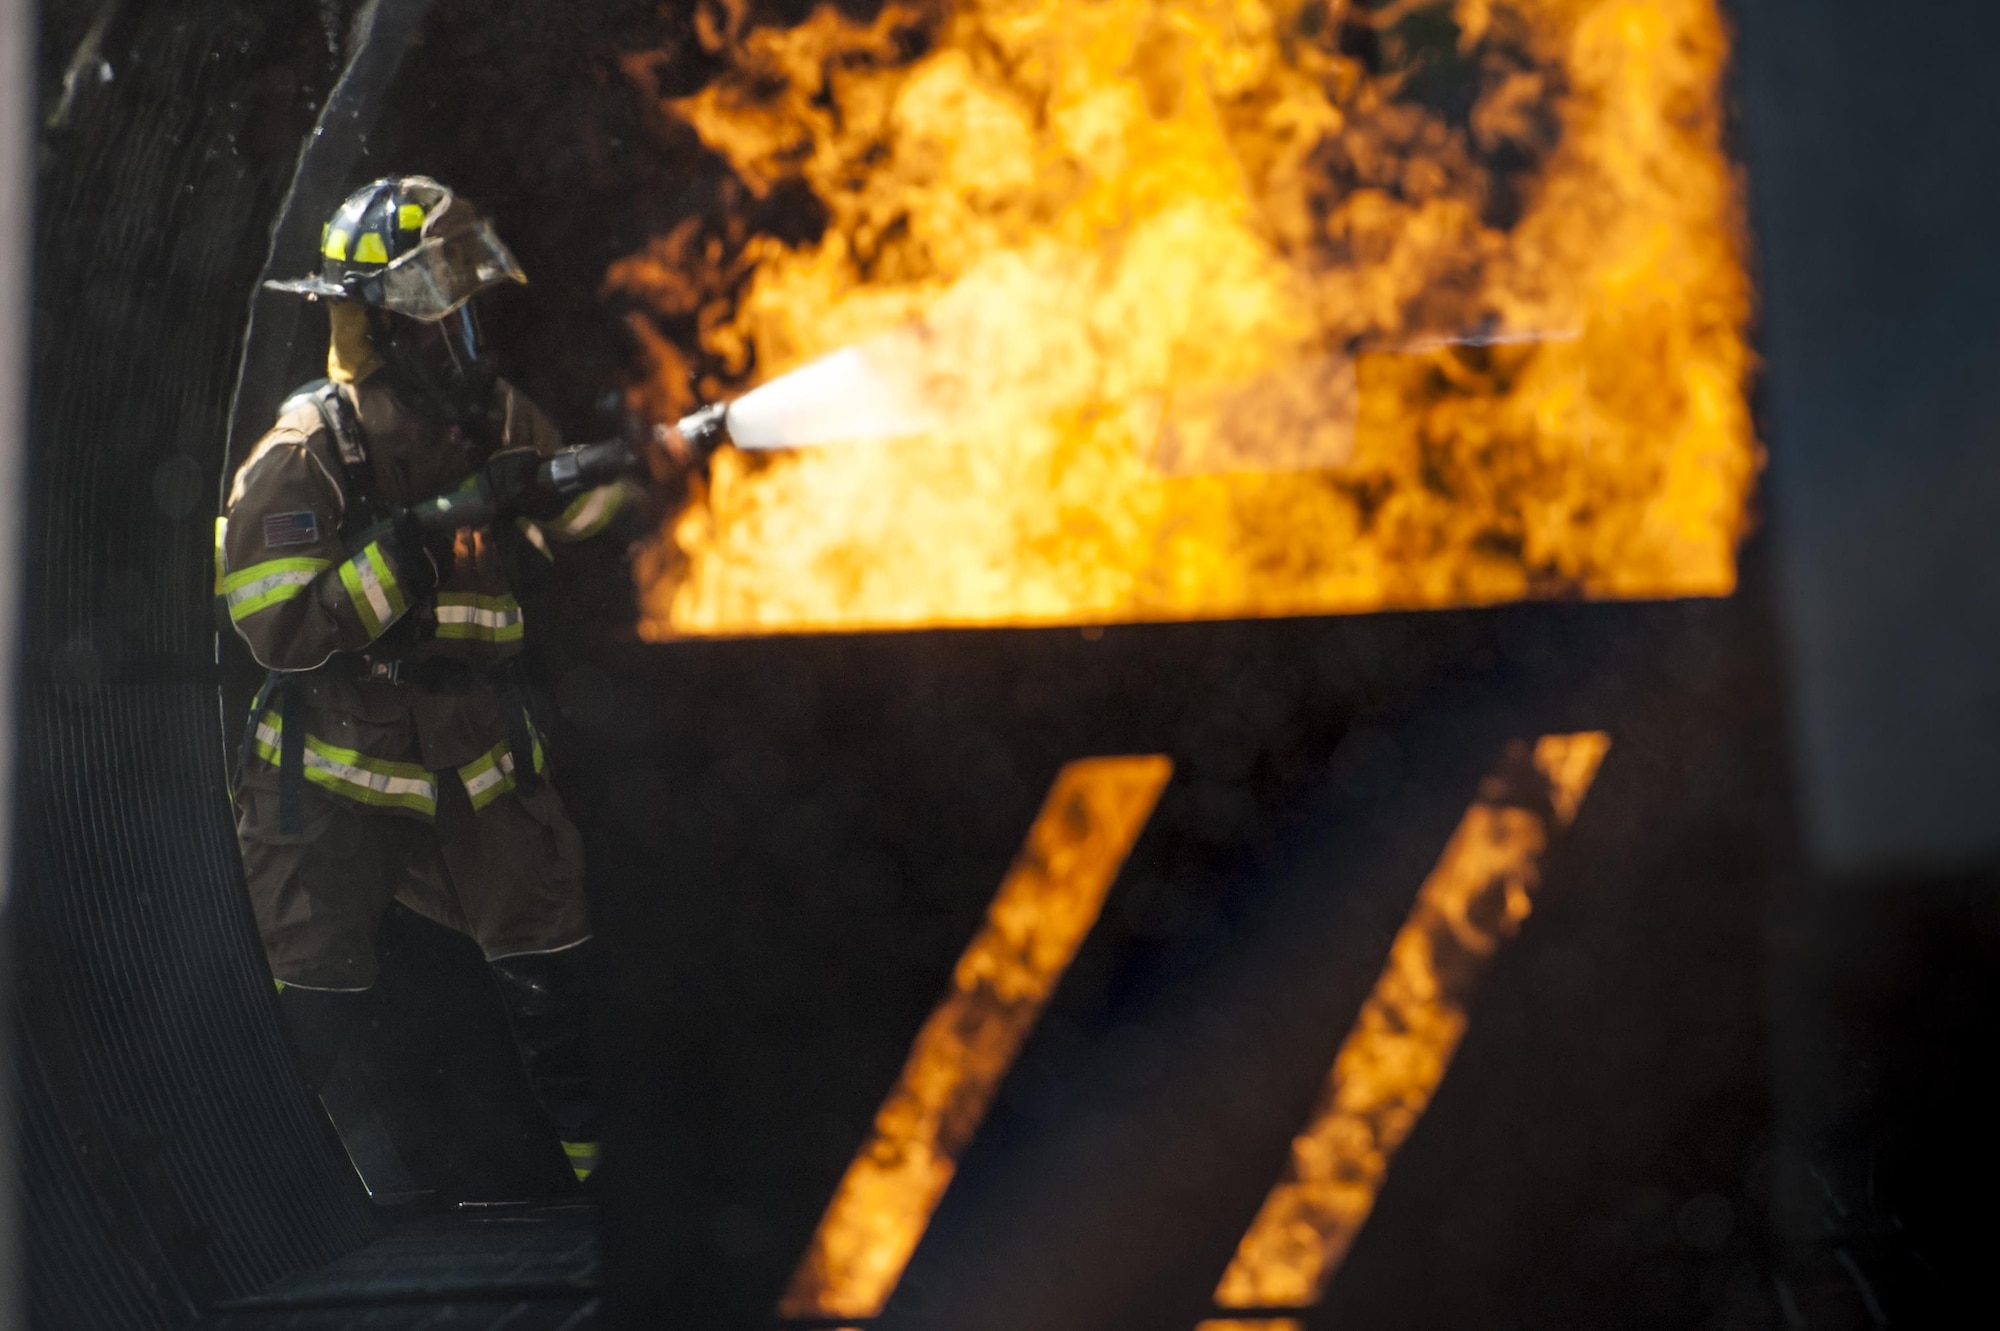 A firefighter from the 23d Civil Engineer Squadron puts out an engine fire during aircraft live fire training, April 27, 2016, at Moody Air Force Base, Ga. During the training exercise, Airmen practiced the proper techniques to extinguish a jet fuel fire in the case of an aircraft incident. (U.S. Air Force photo by Airman 1st Class Lauren M. Hunter/Released)